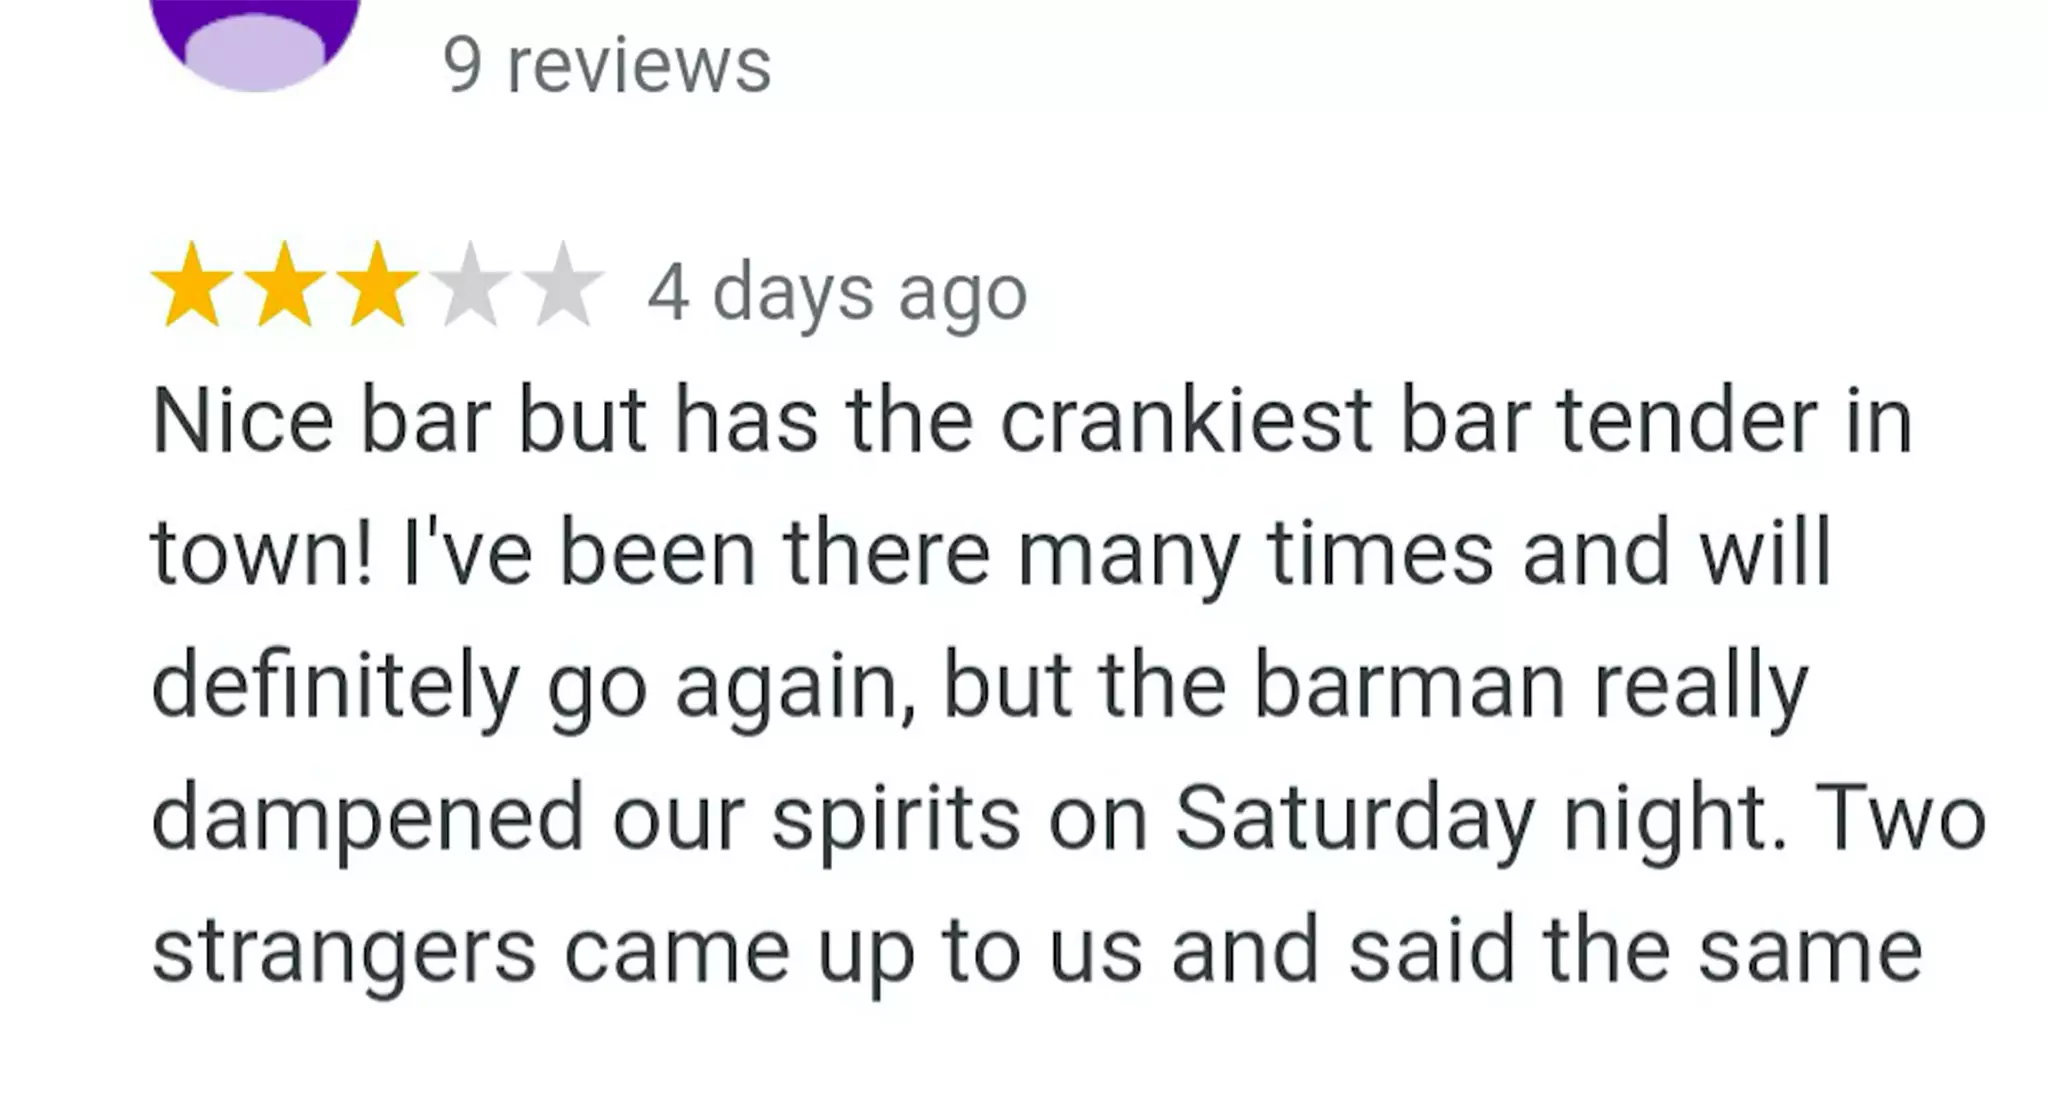 The review accused the barman of being cranky (